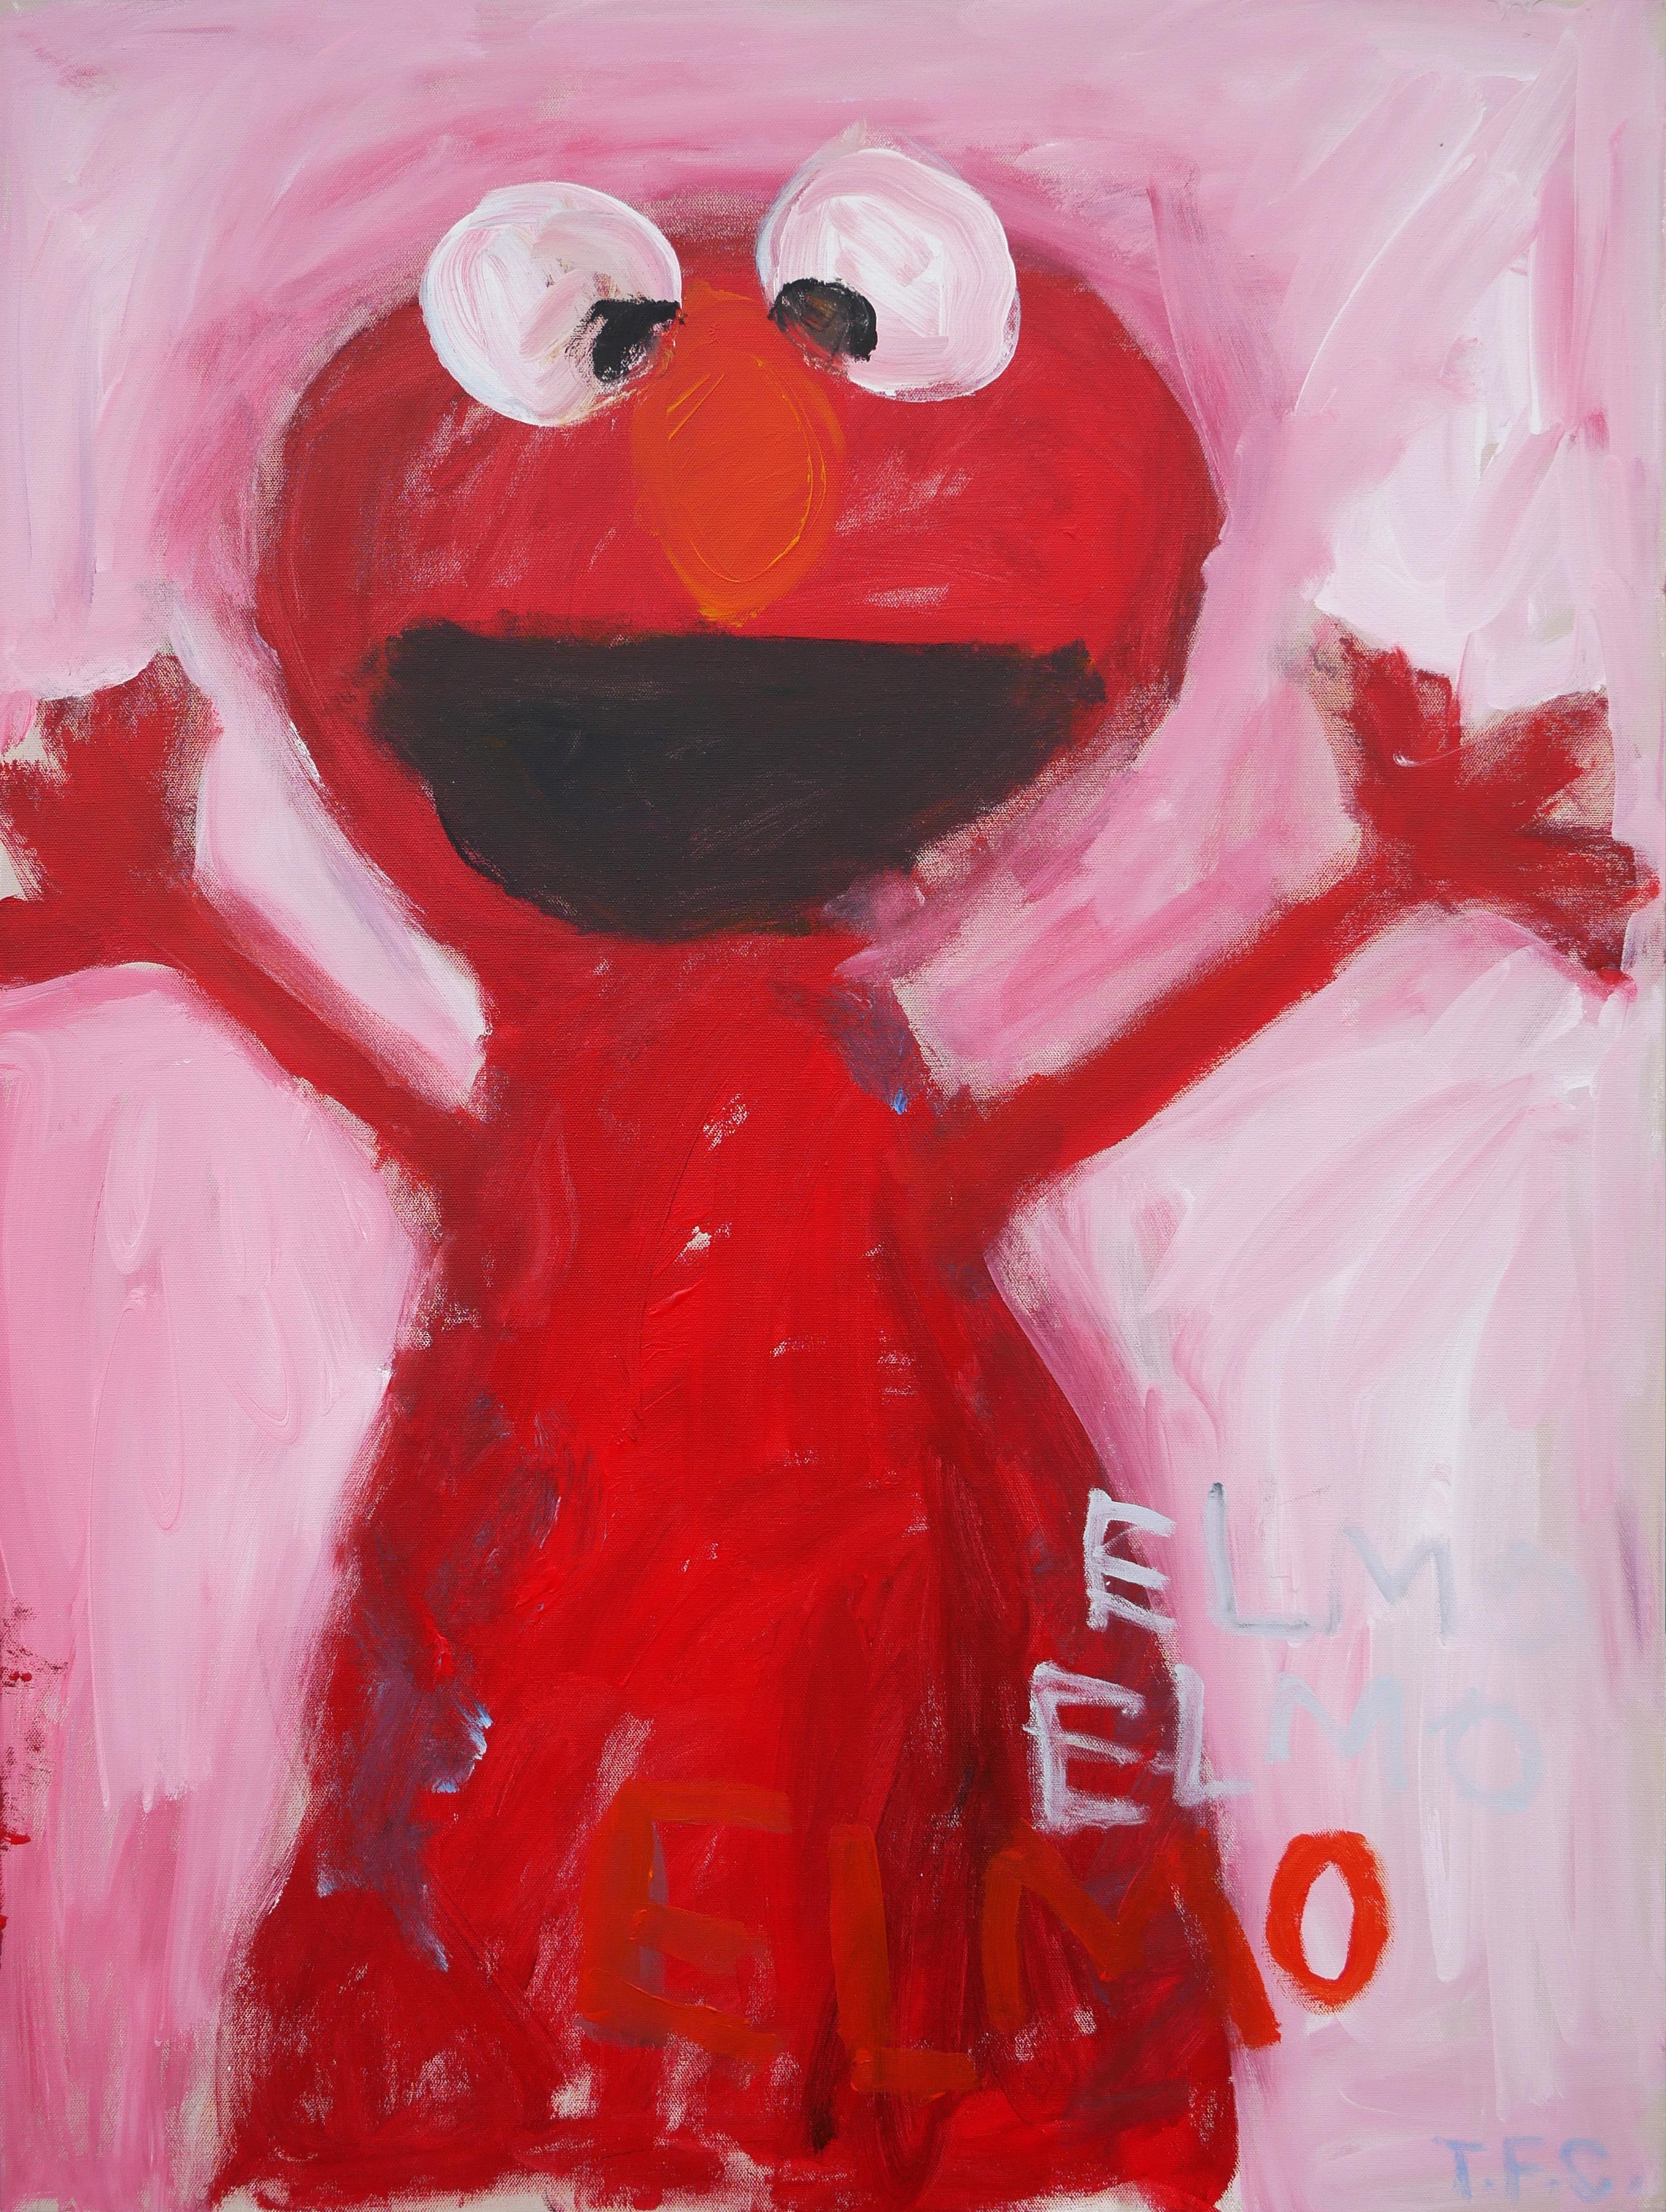 Tyler Casey Figurative Painting - "Elmo" Contemporary Abstract Pop Art Figure Painting of Sesame Street Character 